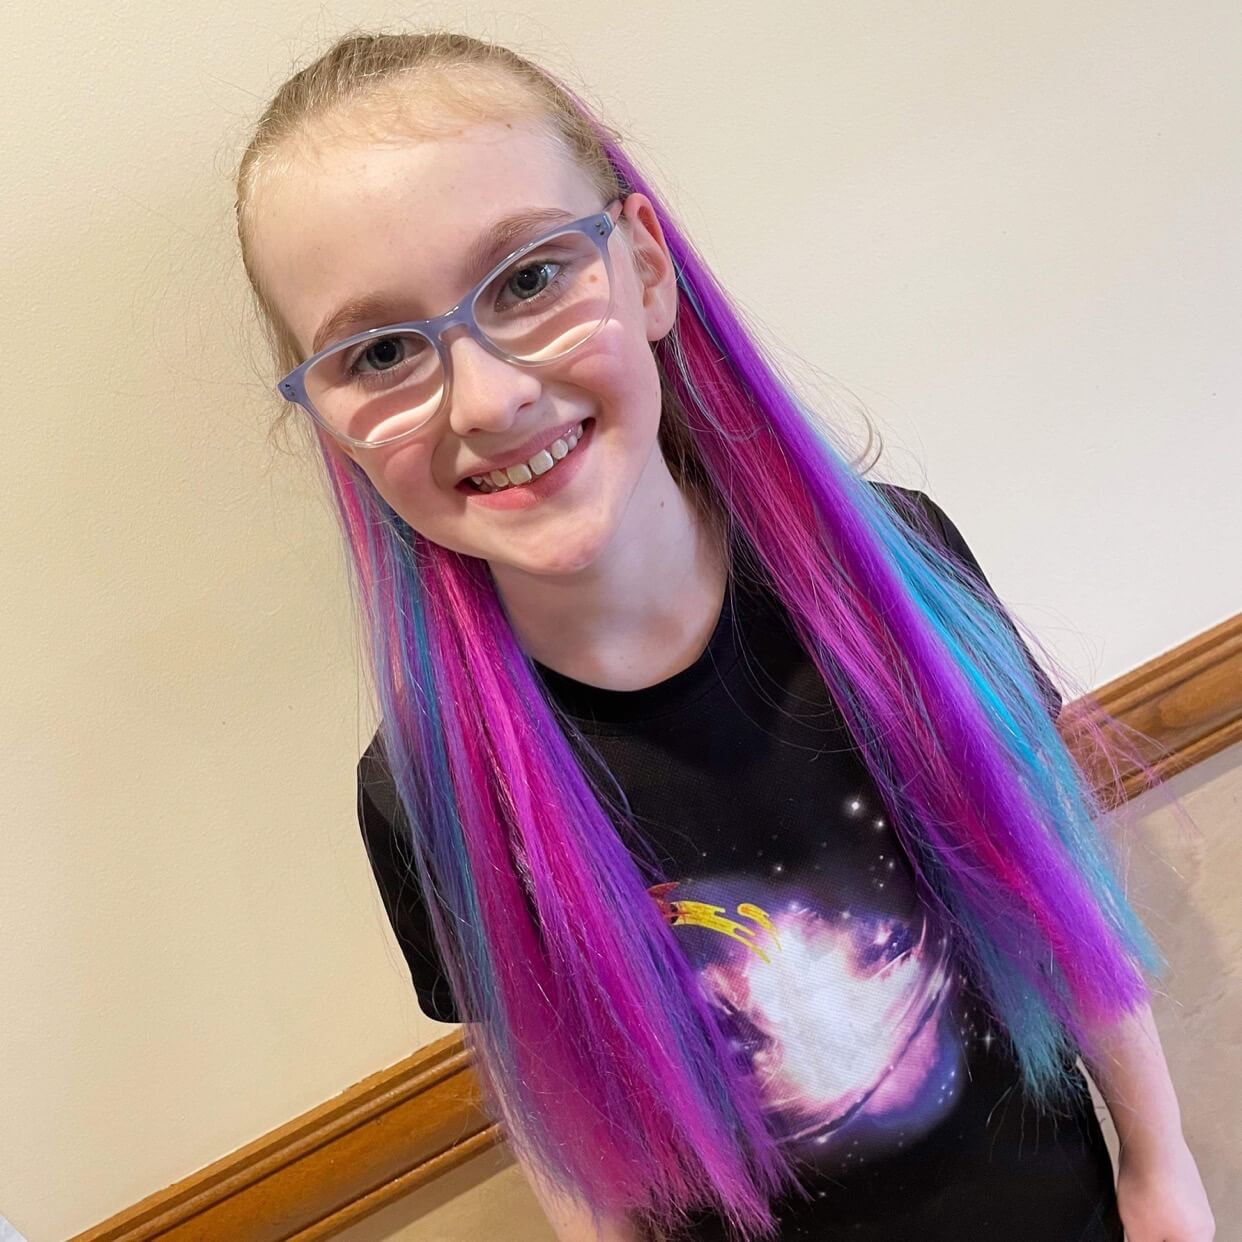 Rainbow hair extensions on a little girl with glasses.